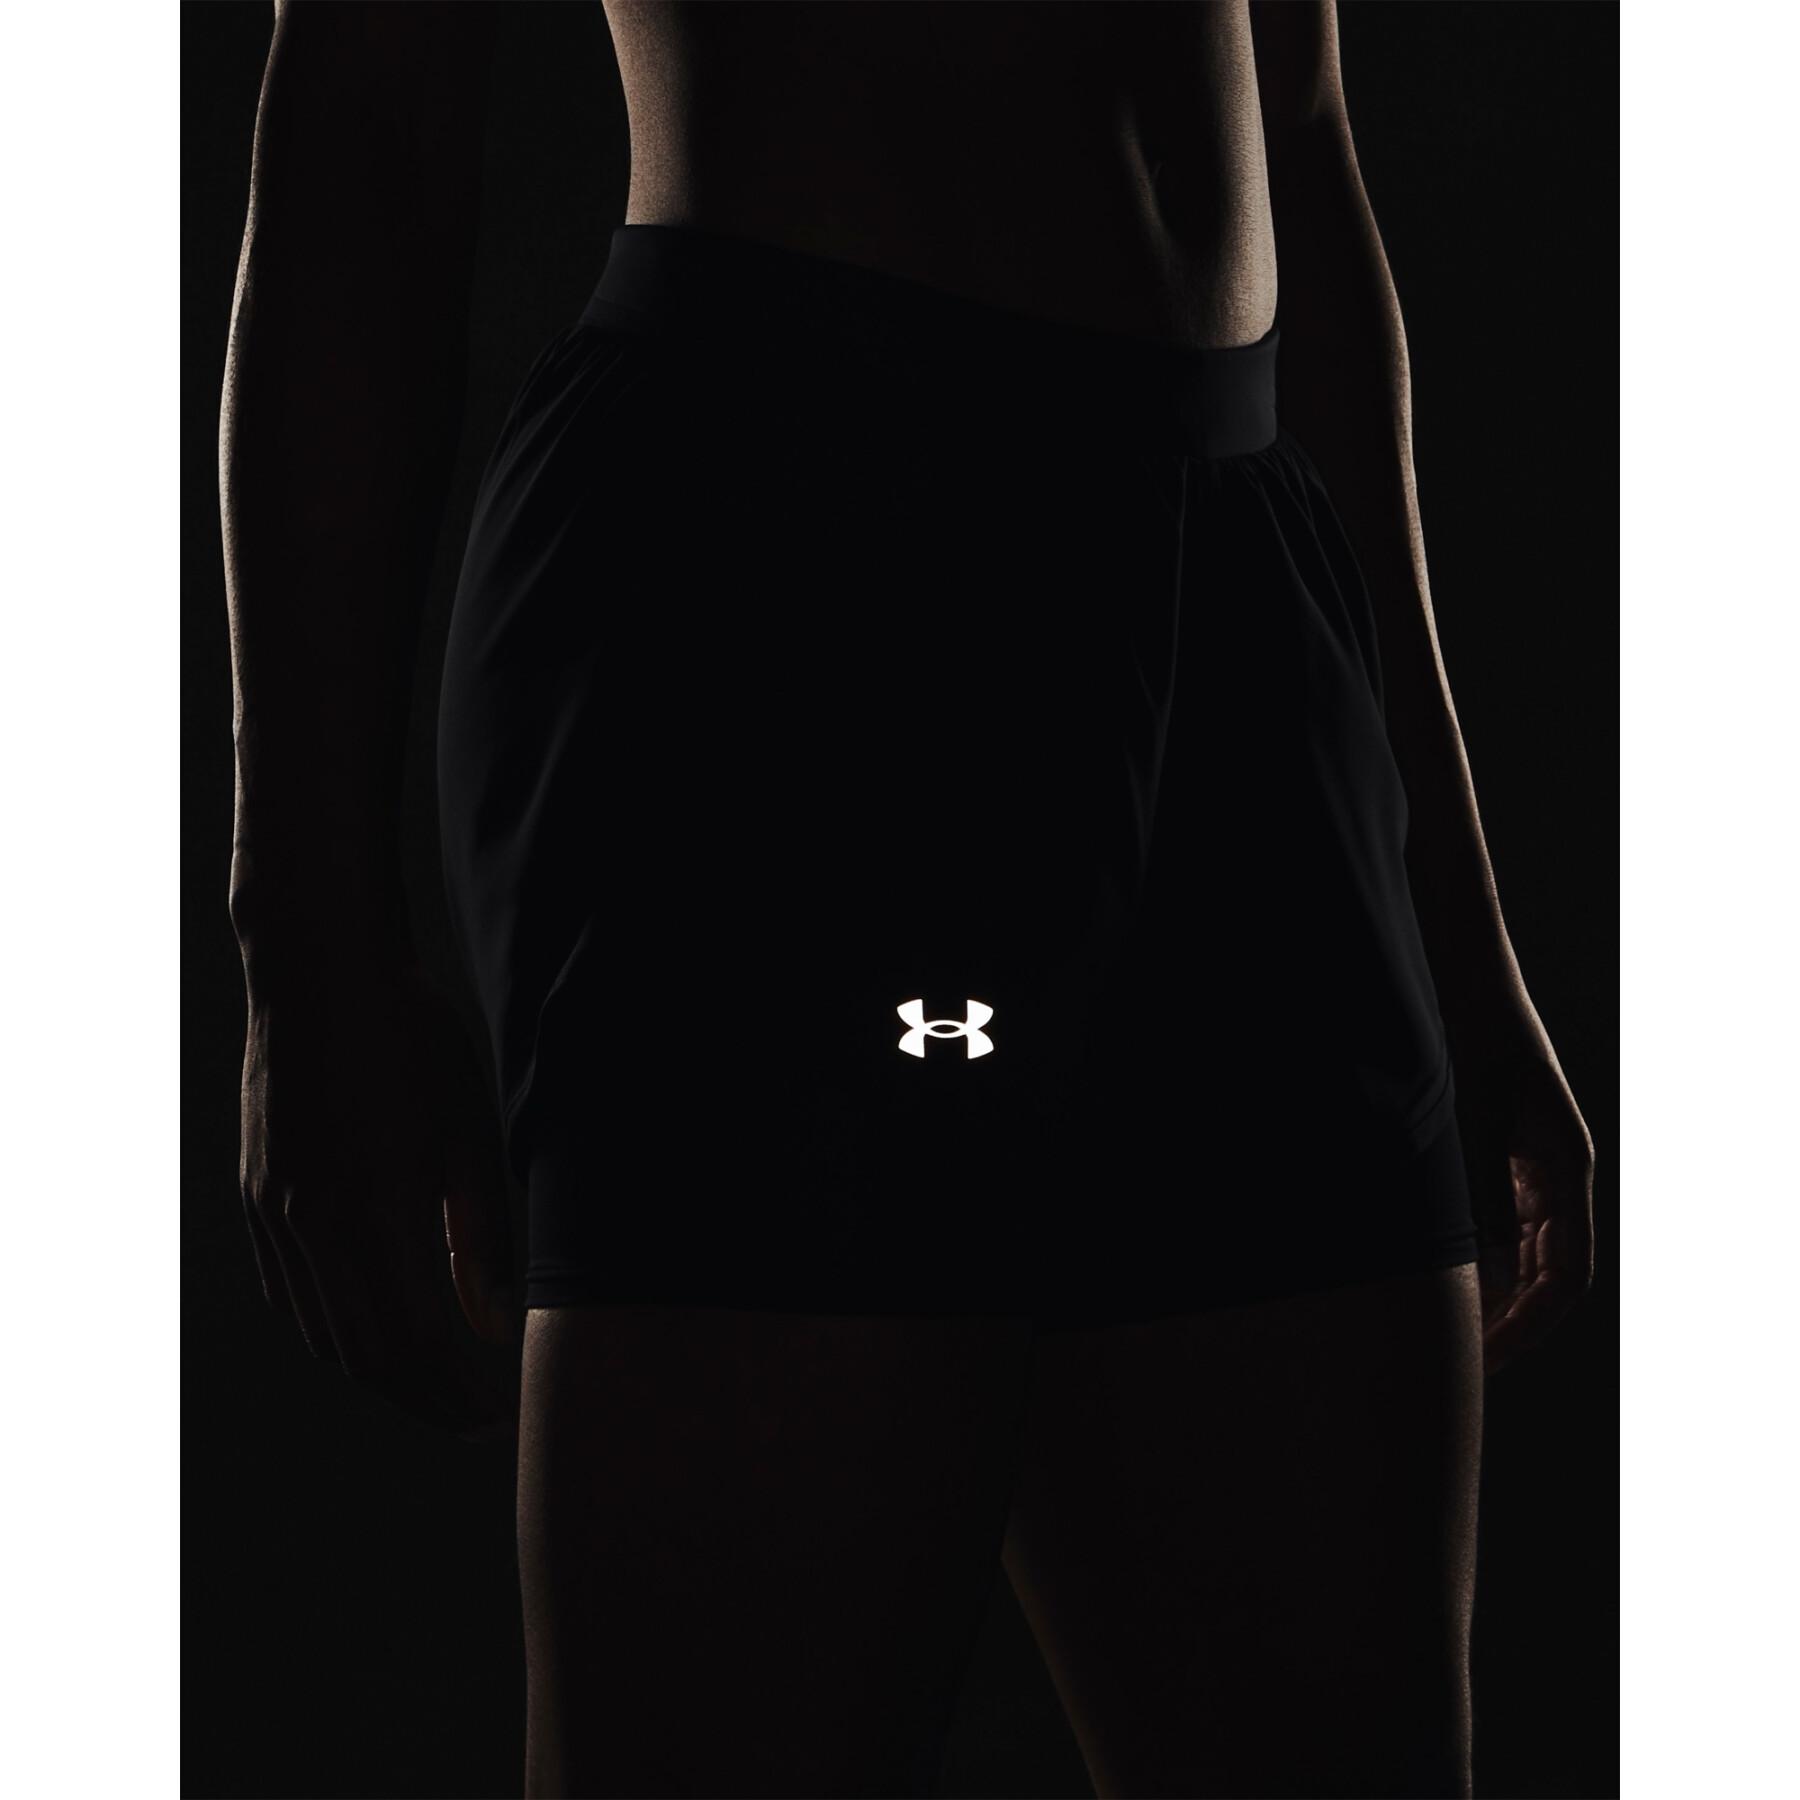 Women's shorts Under Armour Fly By Elite